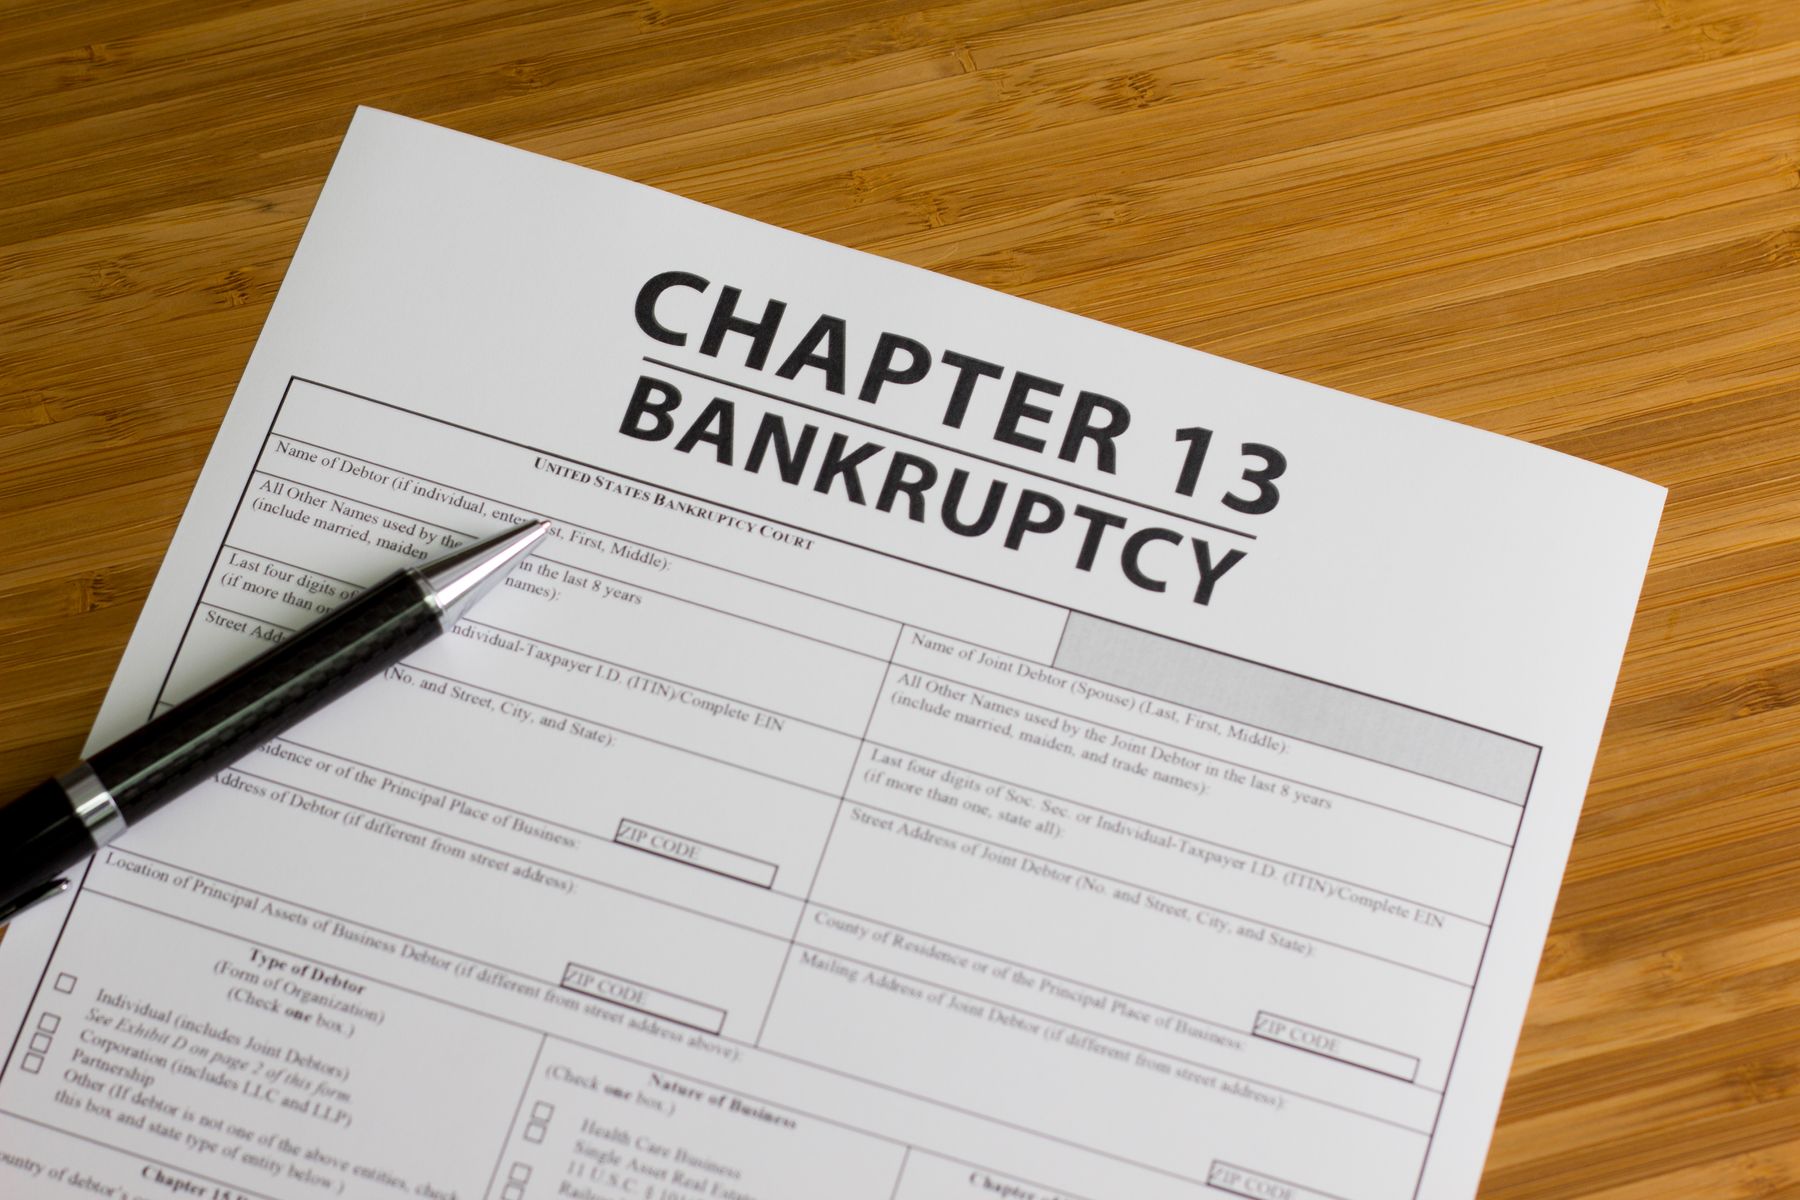 What You Need to Know About Chapter 13 Bankruptcy